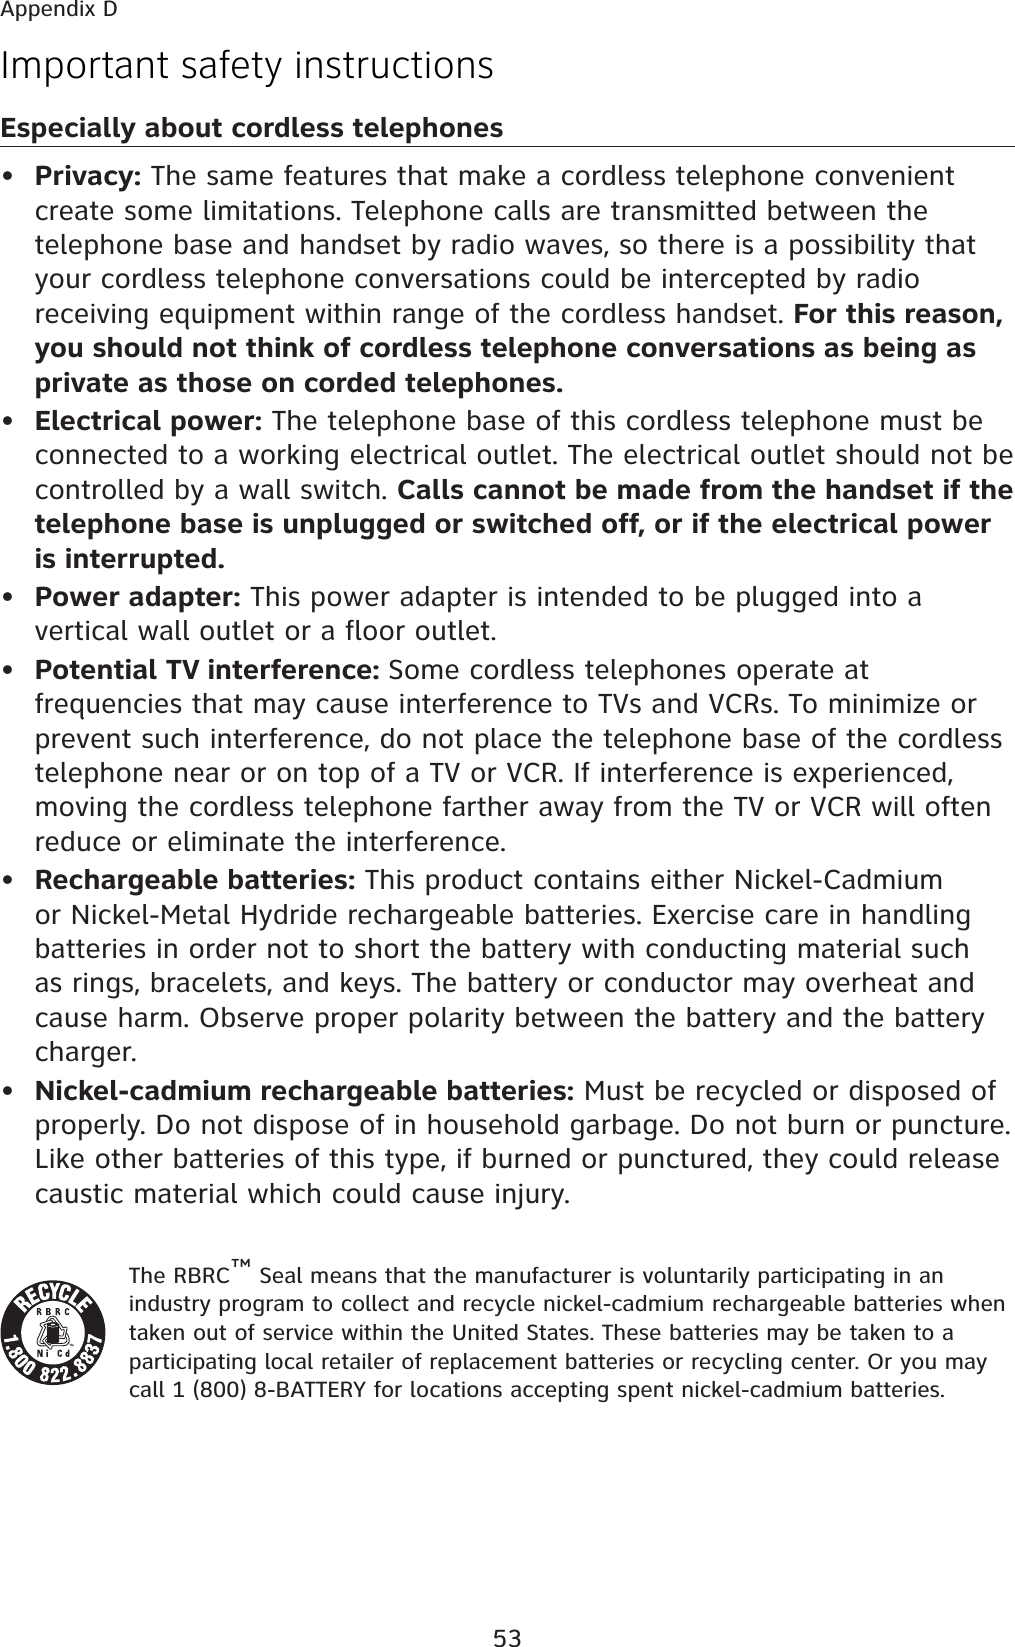 53Important safety instructionsEspecially about cordless telephones•  Privacy: The same features that make a cordless telephone convenient create some limitations. Telephone calls are transmitted between the telephone base and handset by radio waves, so there is a possibility that your cordless telephone conversations could be intercepted by radio receiving equipment within range of the cordless handset. For this reason, you should not think of cordless telephone conversations as being as private as those on corded telephones.•  Electrical power: The telephone base of this cordless telephone must be connected to a working electrical outlet. The electrical outlet should not be controlled by a wall switch. Calls cannot be made from the handset if the telephone base is unplugged or switched off, or if the electrical power is interrupted.•  Power adapter: This power adapter is intended to be plugged into a vertical wall outlet or a floor outlet.•  Potential TV interference: Some cordless telephones operate at frequencies that may cause interference to TVs and VCRs. To minimize or prevent such interference, do not place the telephone base of the cordless telephone near or on top of a TV or VCR. If interference is experienced, moving the cordless telephone farther away from the TV or VCR will often reduce or eliminate the interference. •  Rechargeable batteries: This product contains either Nickel-Cadmium or Nickel-Metal Hydride rechargeable batteries. Exercise care in handling batteries in order not to short the battery with conducting material such as rings, bracelets, and keys. The battery or conductor may overheat and cause harm. Observe proper polarity between the battery and the battery charger.•  Nickel-cadmium rechargeable batteries: Must be recycled or disposed of properly. Do not dispose of in household garbage. Do not burn or puncture. Like other batteries of this type, if burned or punctured, they could release caustic material which could cause injury.The RBRC™ Seal means that the manufacturer is voluntarily participating in an industry program to collect and recycle nickel-cadmium rechargeable batteries when taken out of service within the United States. These batteries may be taken to a participating local retailer of replacement batteries or recycling center. Or you may call 1 (800) 8-BATTERY for locations accepting spent nickel-cadmium batteries. Appendix D